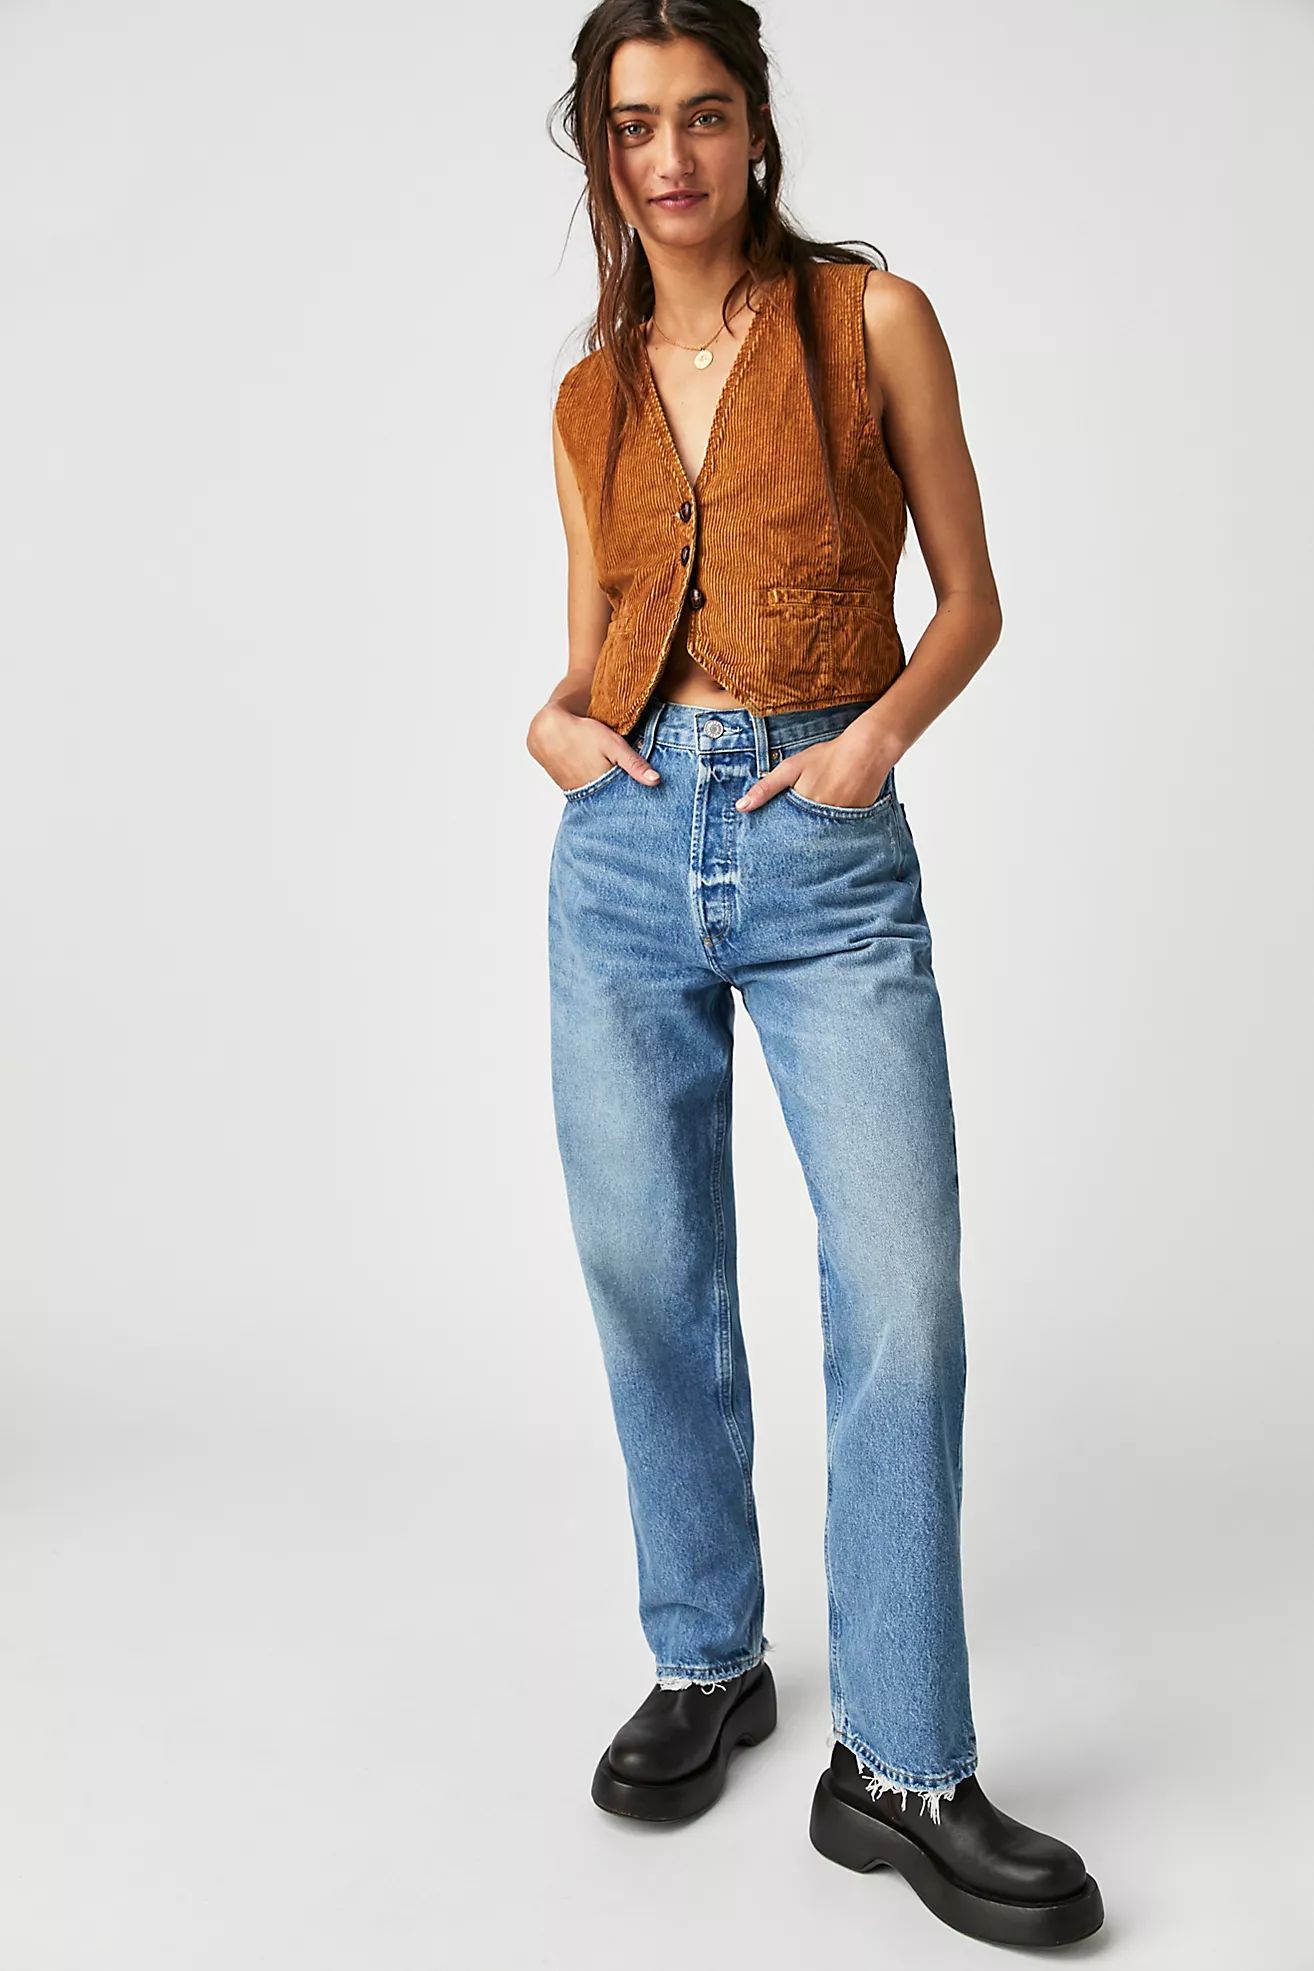 AGOLDE ‘90s Jeans | Free People (UK)